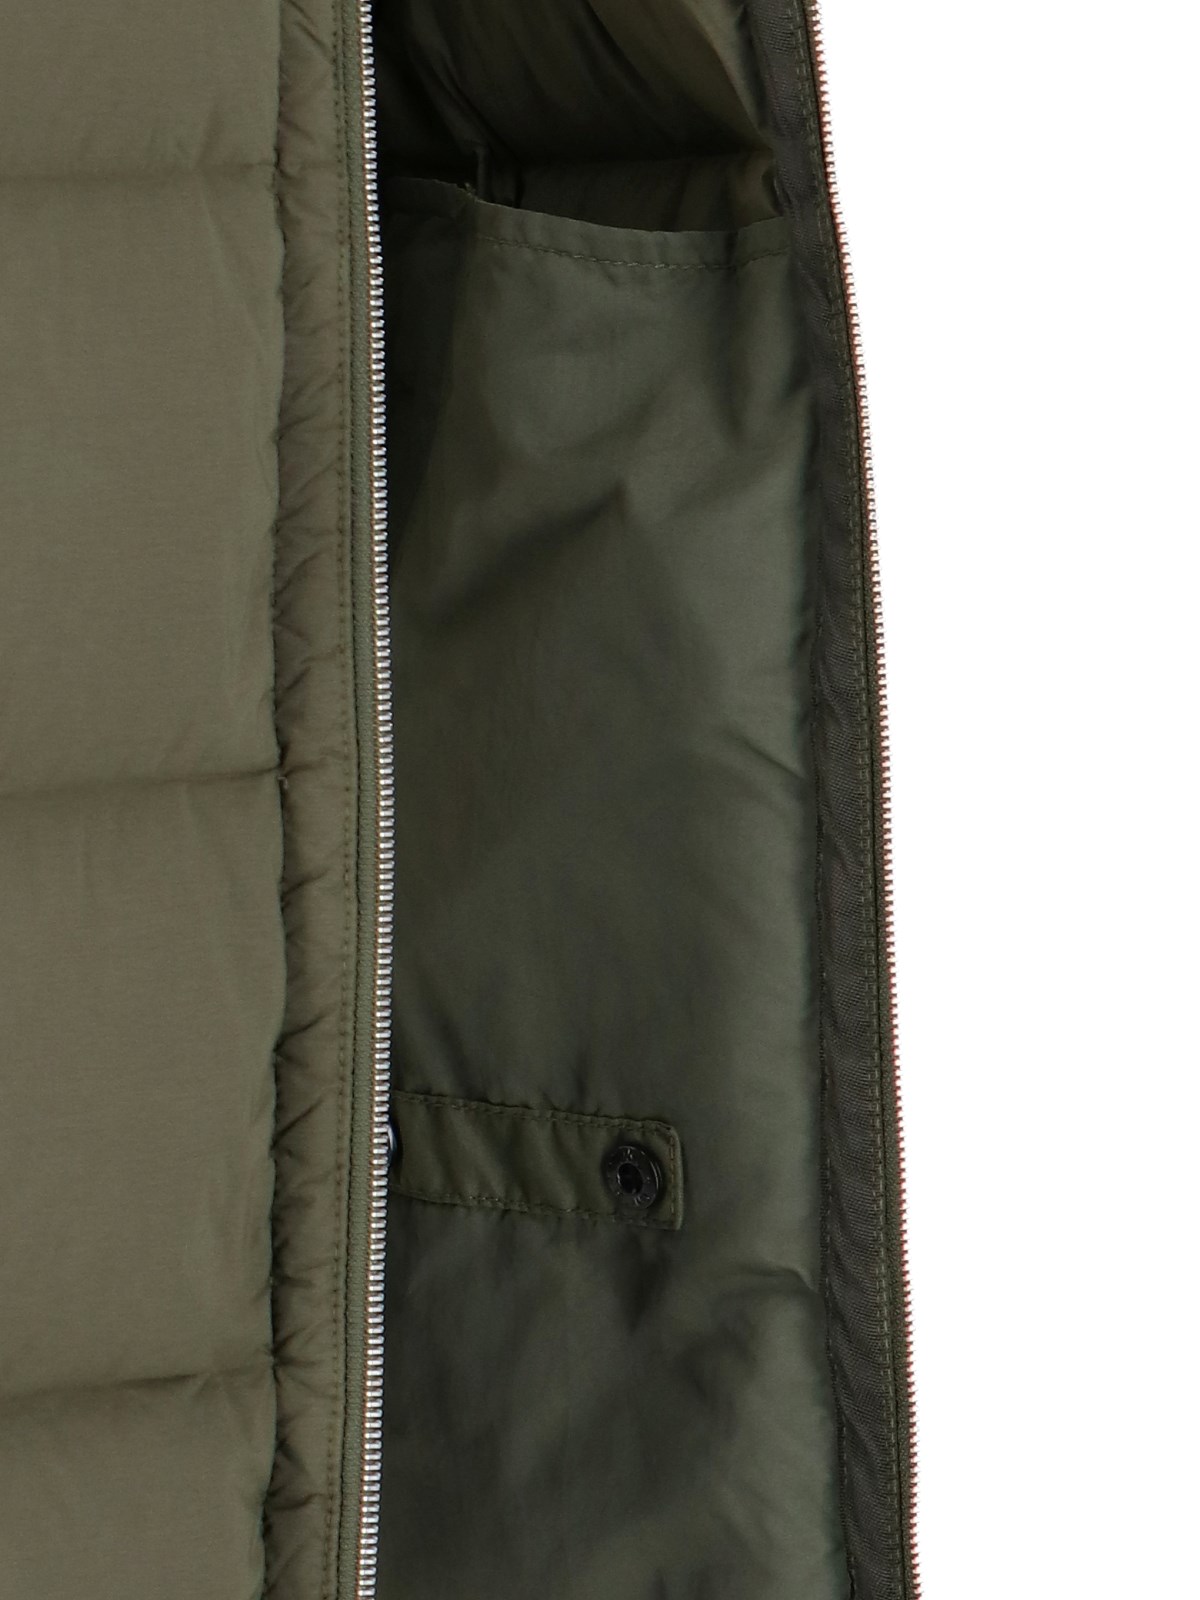 Stone island '43728 seamless tunnel' puffer jacket available on SUGAR -  141846